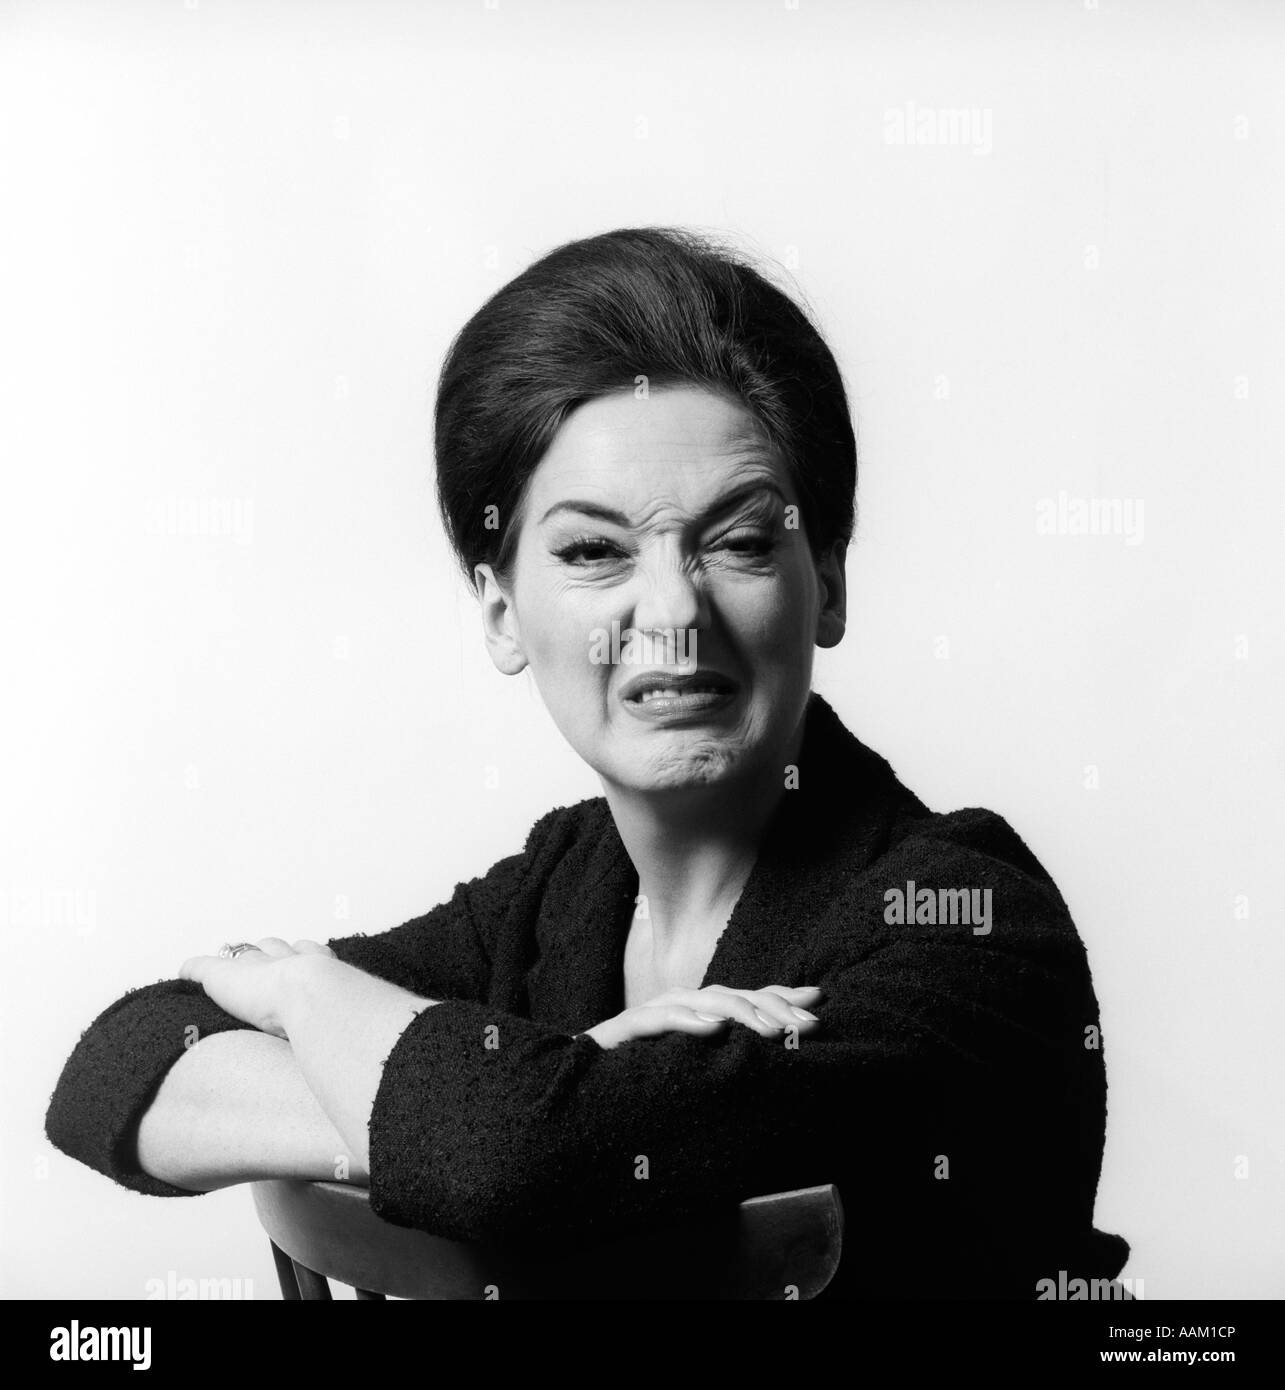 1960s 1970s BRUNETTE MIDDLE AGED WOMAN MAKING FUNNY FACE LOOKING AT CAMERA WITH WRINKLED NOSE AND ARMS FOLDED ON BACK OF CHAIR Stock Photo